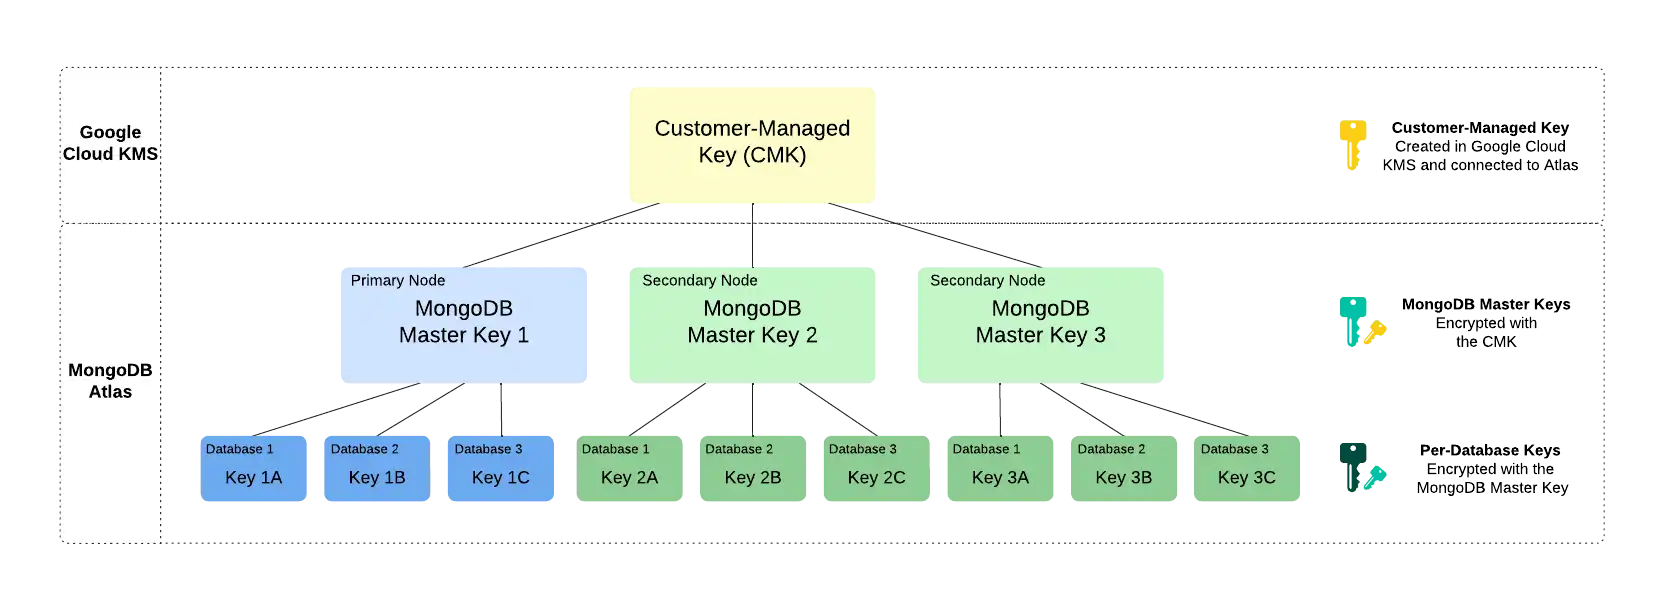 Diagram of CMK workflow with Google Cloud KMS and Atlas